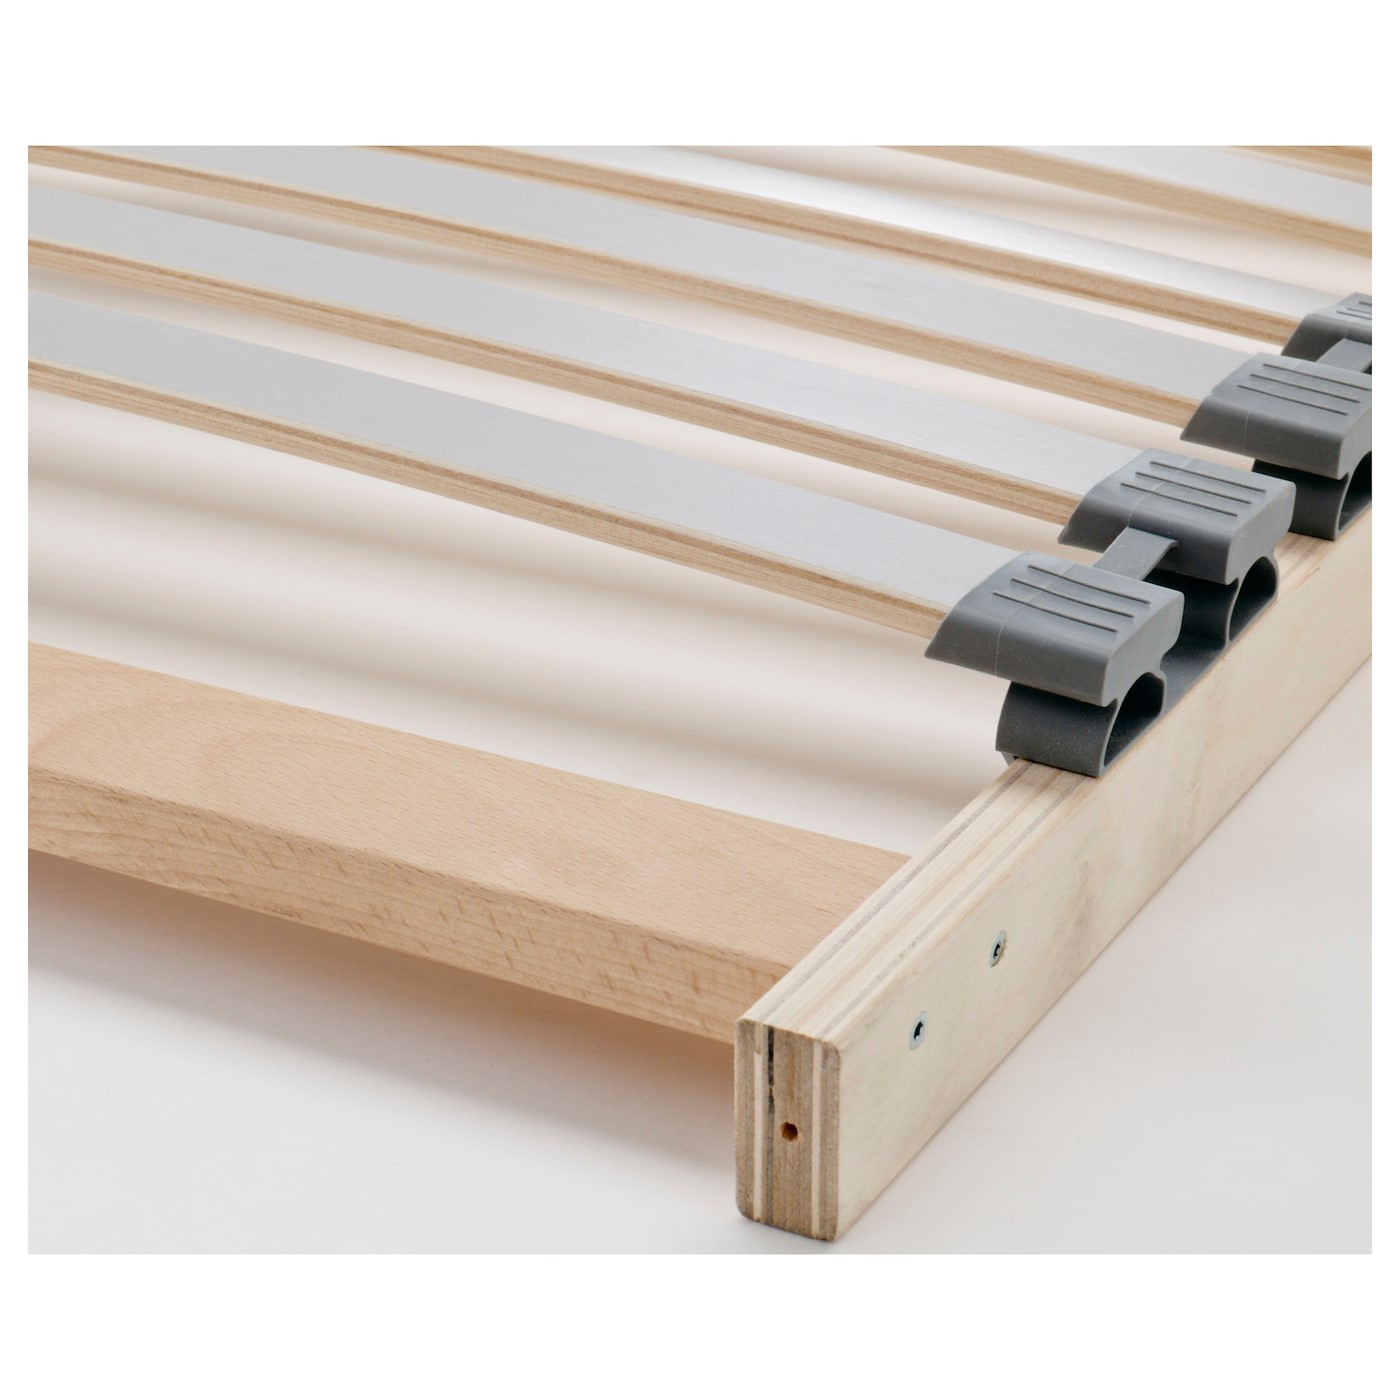 MALM Bed frame, high, w 4 storage boxes